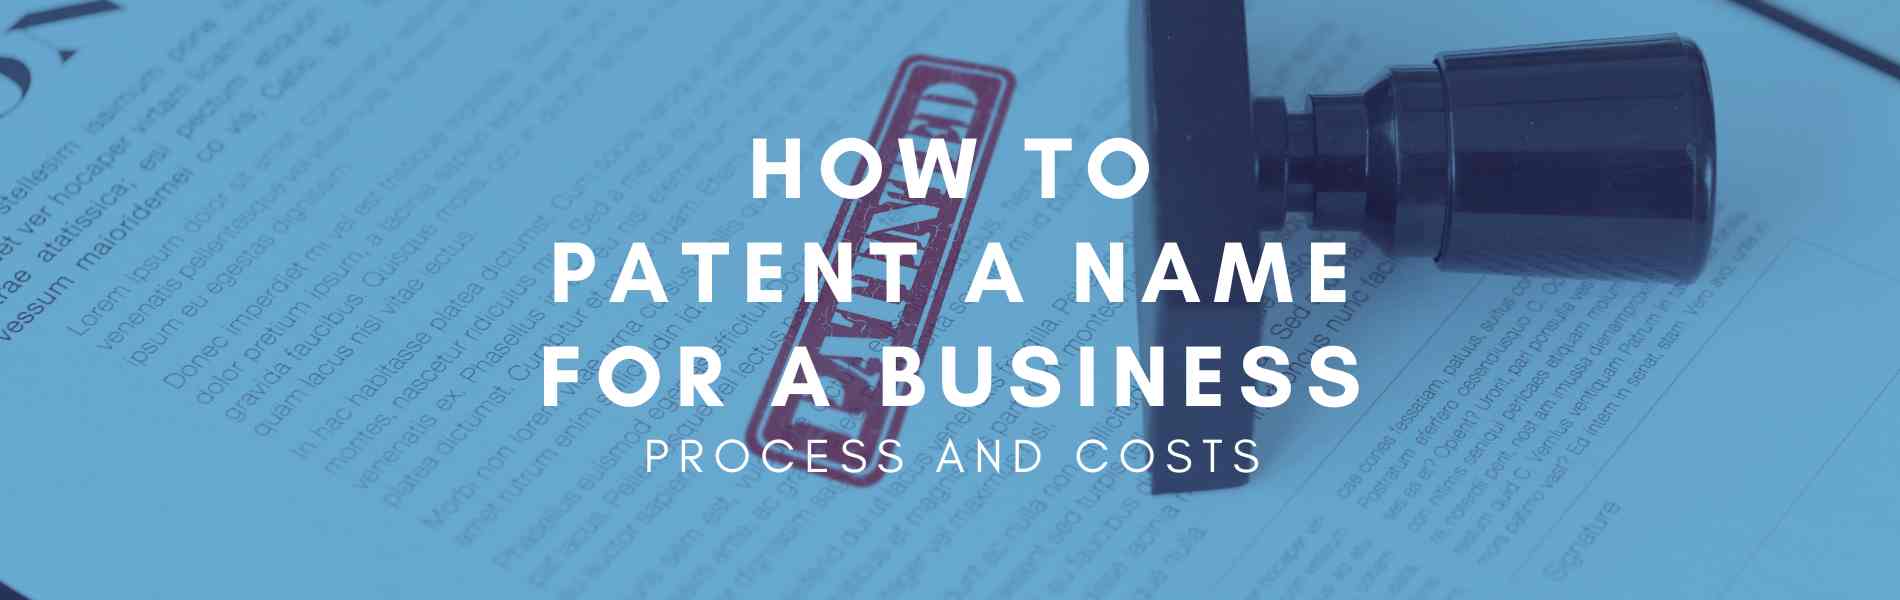 How to Patent a Name for a Business